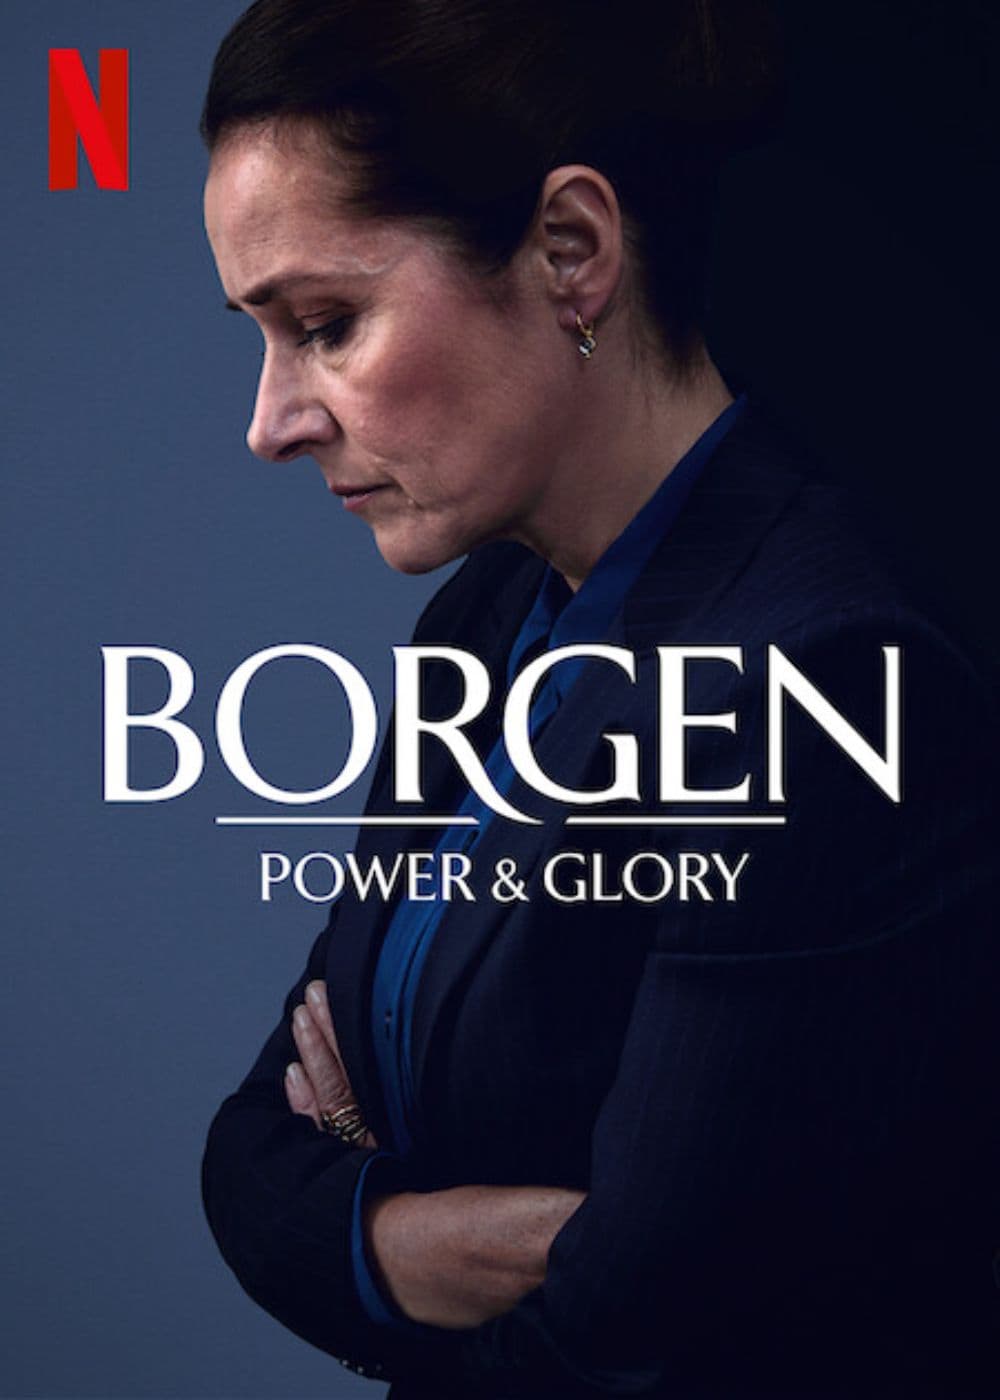 Ten Reasons to Watch Danish Drama 'Borgen' | Belle About Town